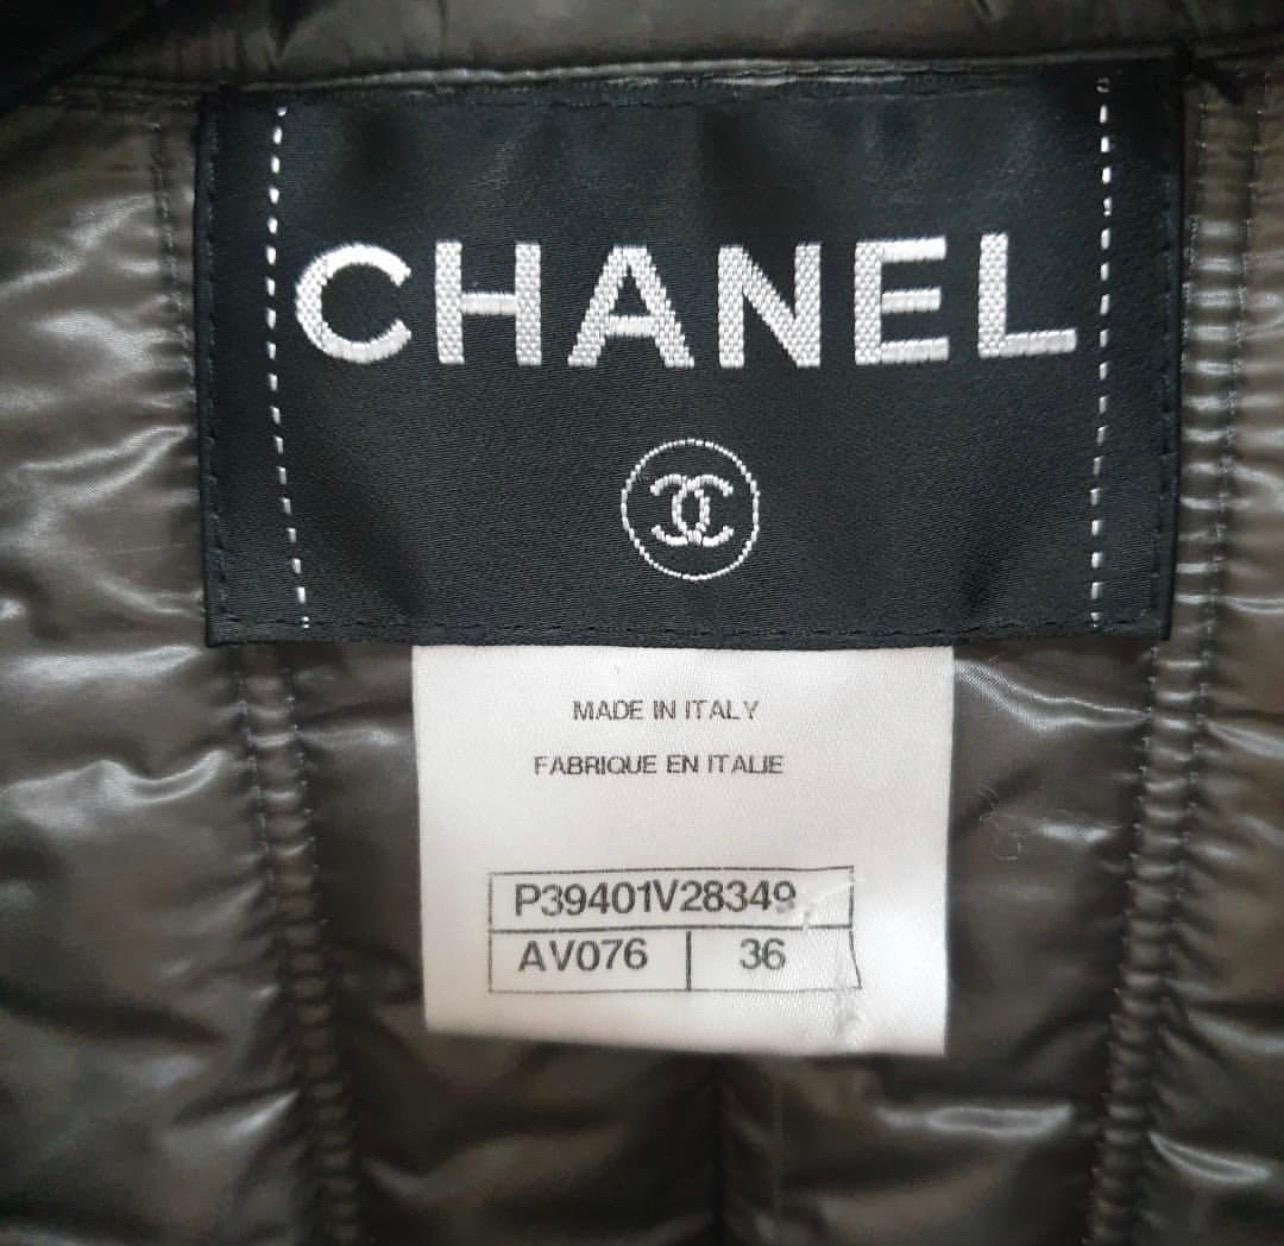 From the Fall 2010 Collection. 
Dark grey Chanel quilted puffer jacket with stand collar, rib knit trim, dual slit pockets at sides with logo-embellished buttons and exposed zip closure at center front. 
Sz.36
Very good condition.
Hanger is not